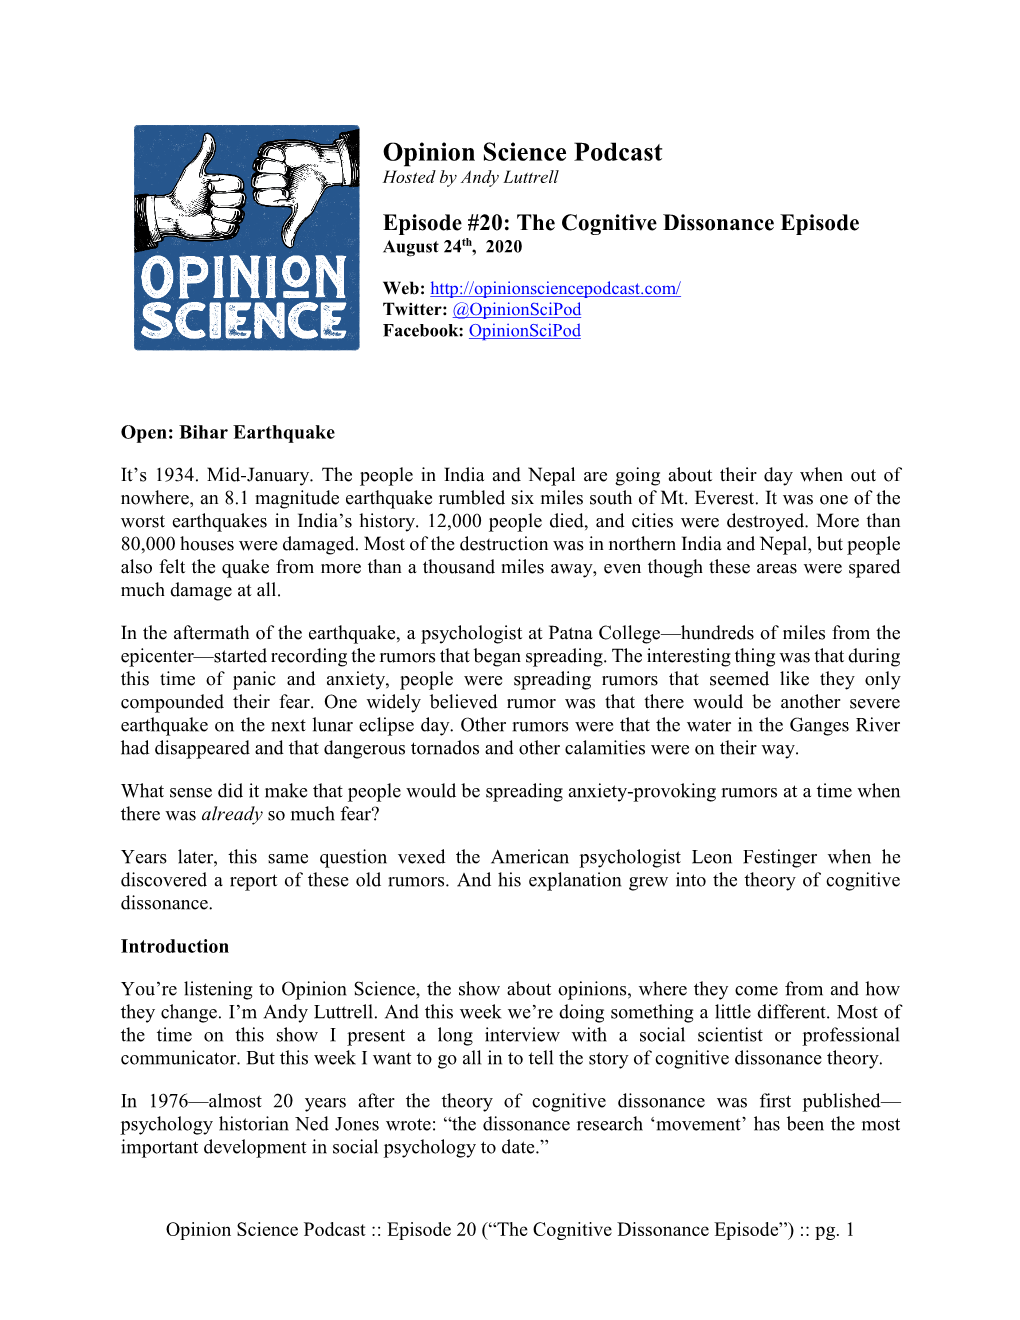 Opinion Science Podcast Hosted by Andy Luttrell